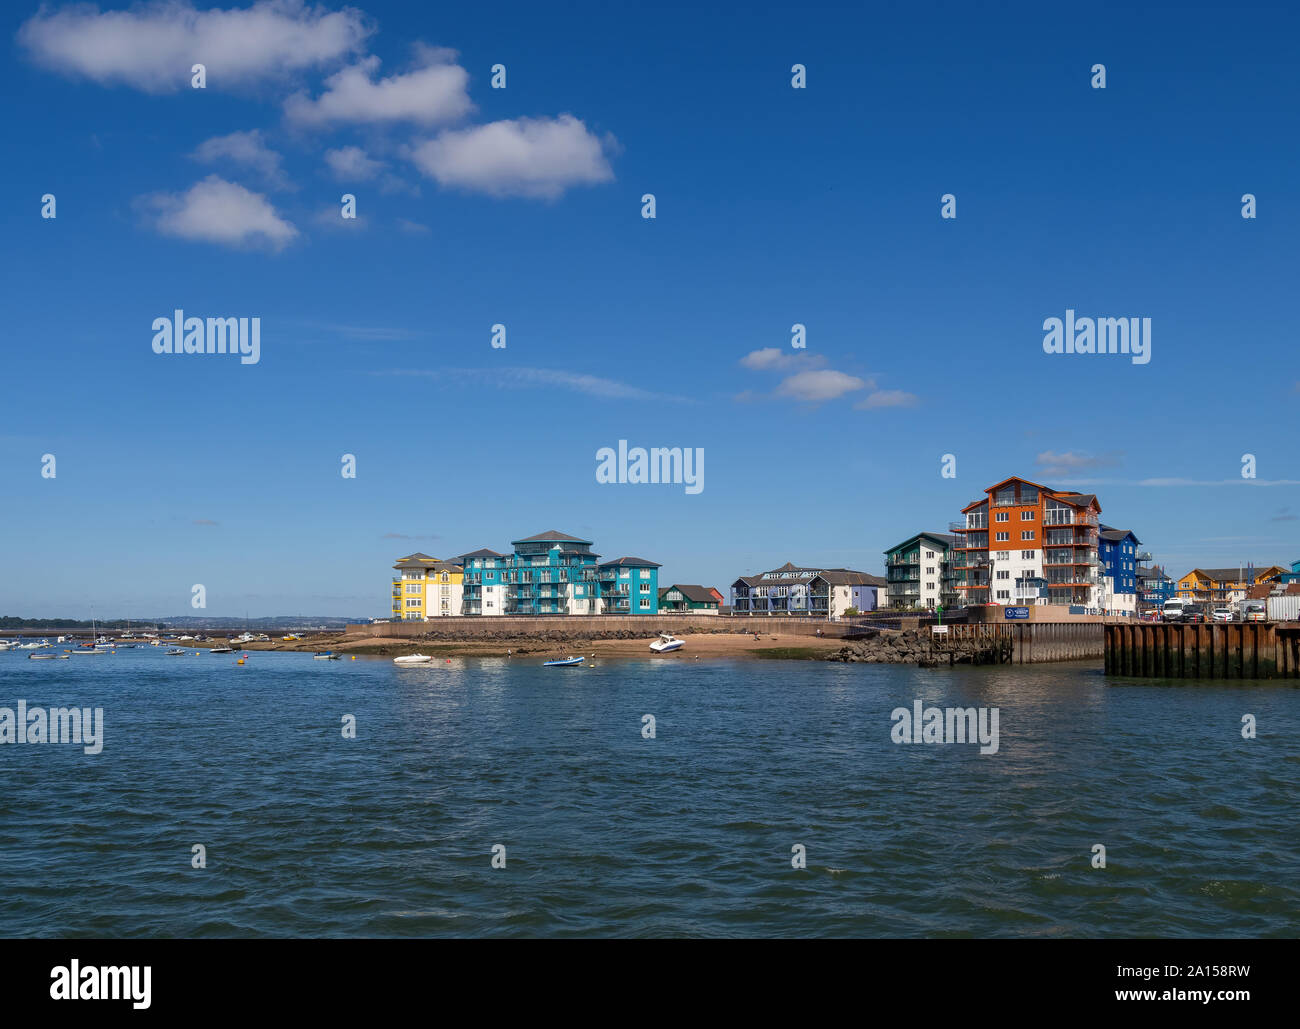 EXMOUTH MARINA, DEVON, UK - SEPTEMBER 20, 2019: View of seafront and marina, seen from offshore on a sunny day. Stock Photo